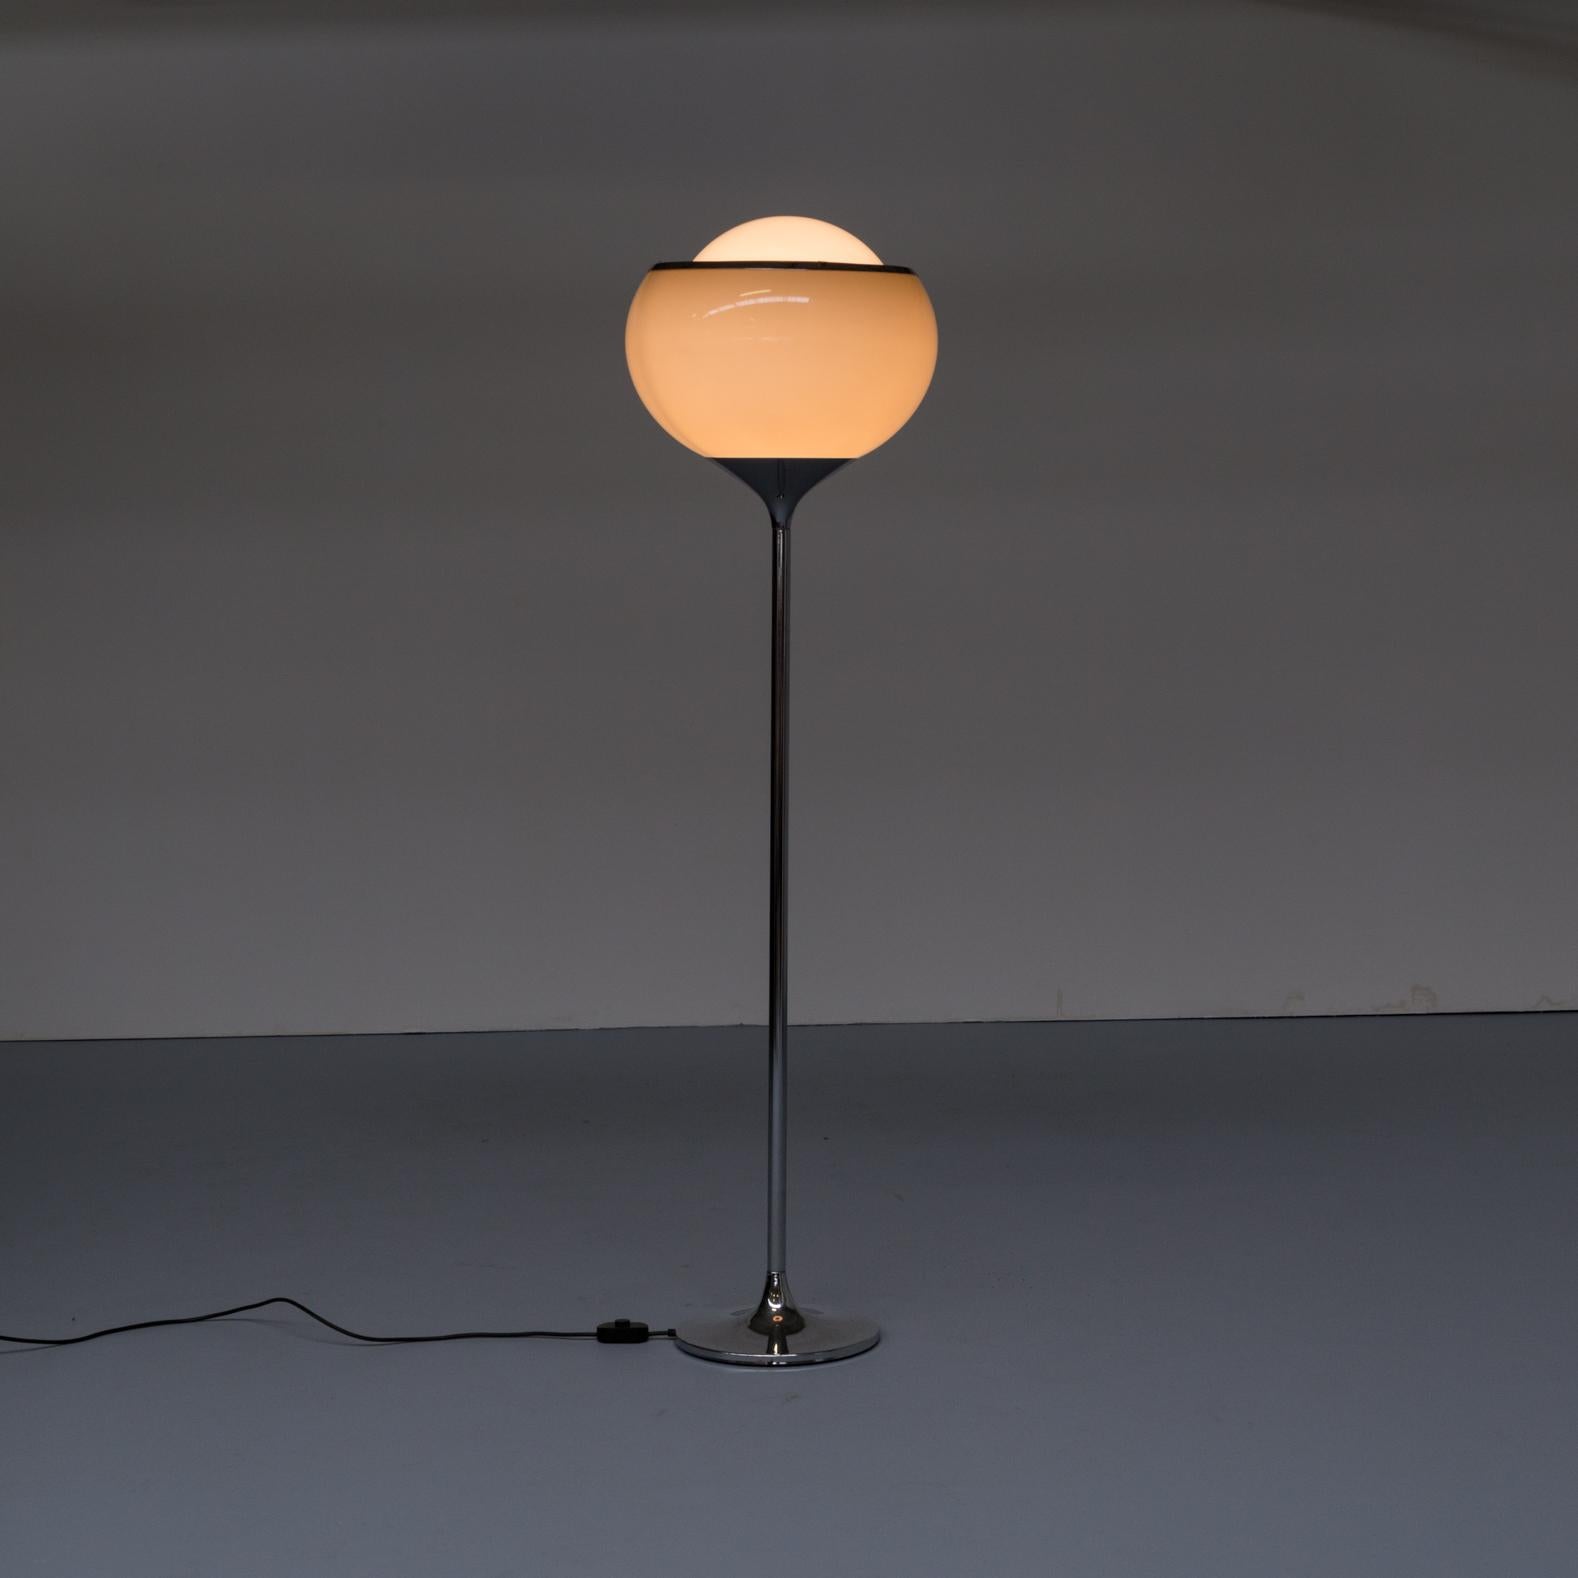 1960s Harvey Guzzini ‘bud grande’ floor lamp for Meblo Italy. The floor lamp consists of chrome and perspex and attracts with its simple design. Because of the round form of the hood this lamp is called the ‘Bud Grande’. Good and working condition,